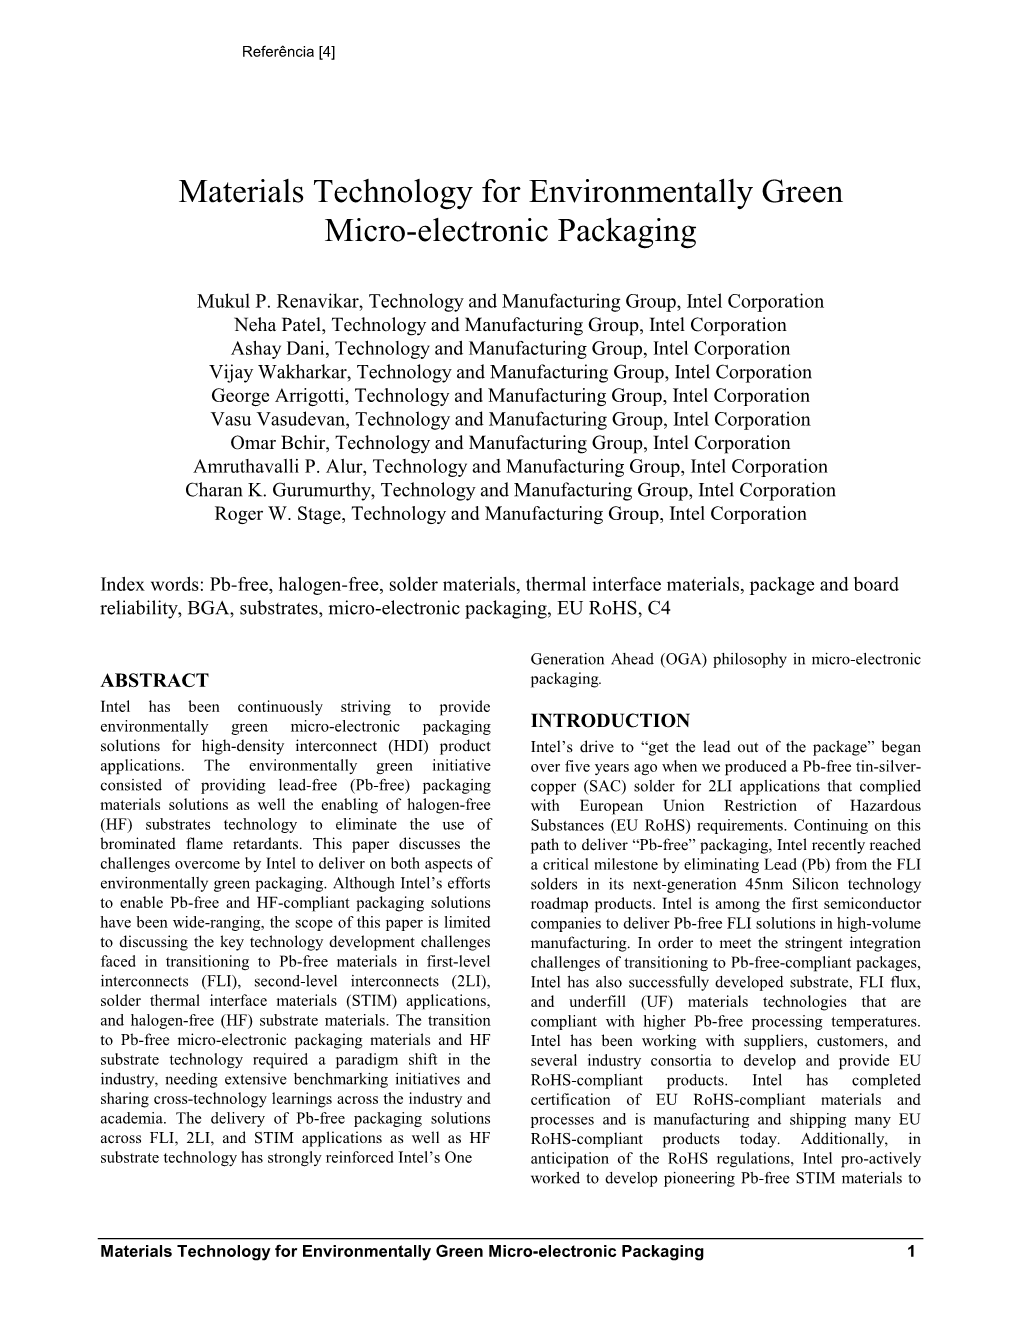 Materials Technology for Environmentally Green Micro-Electronic Packaging